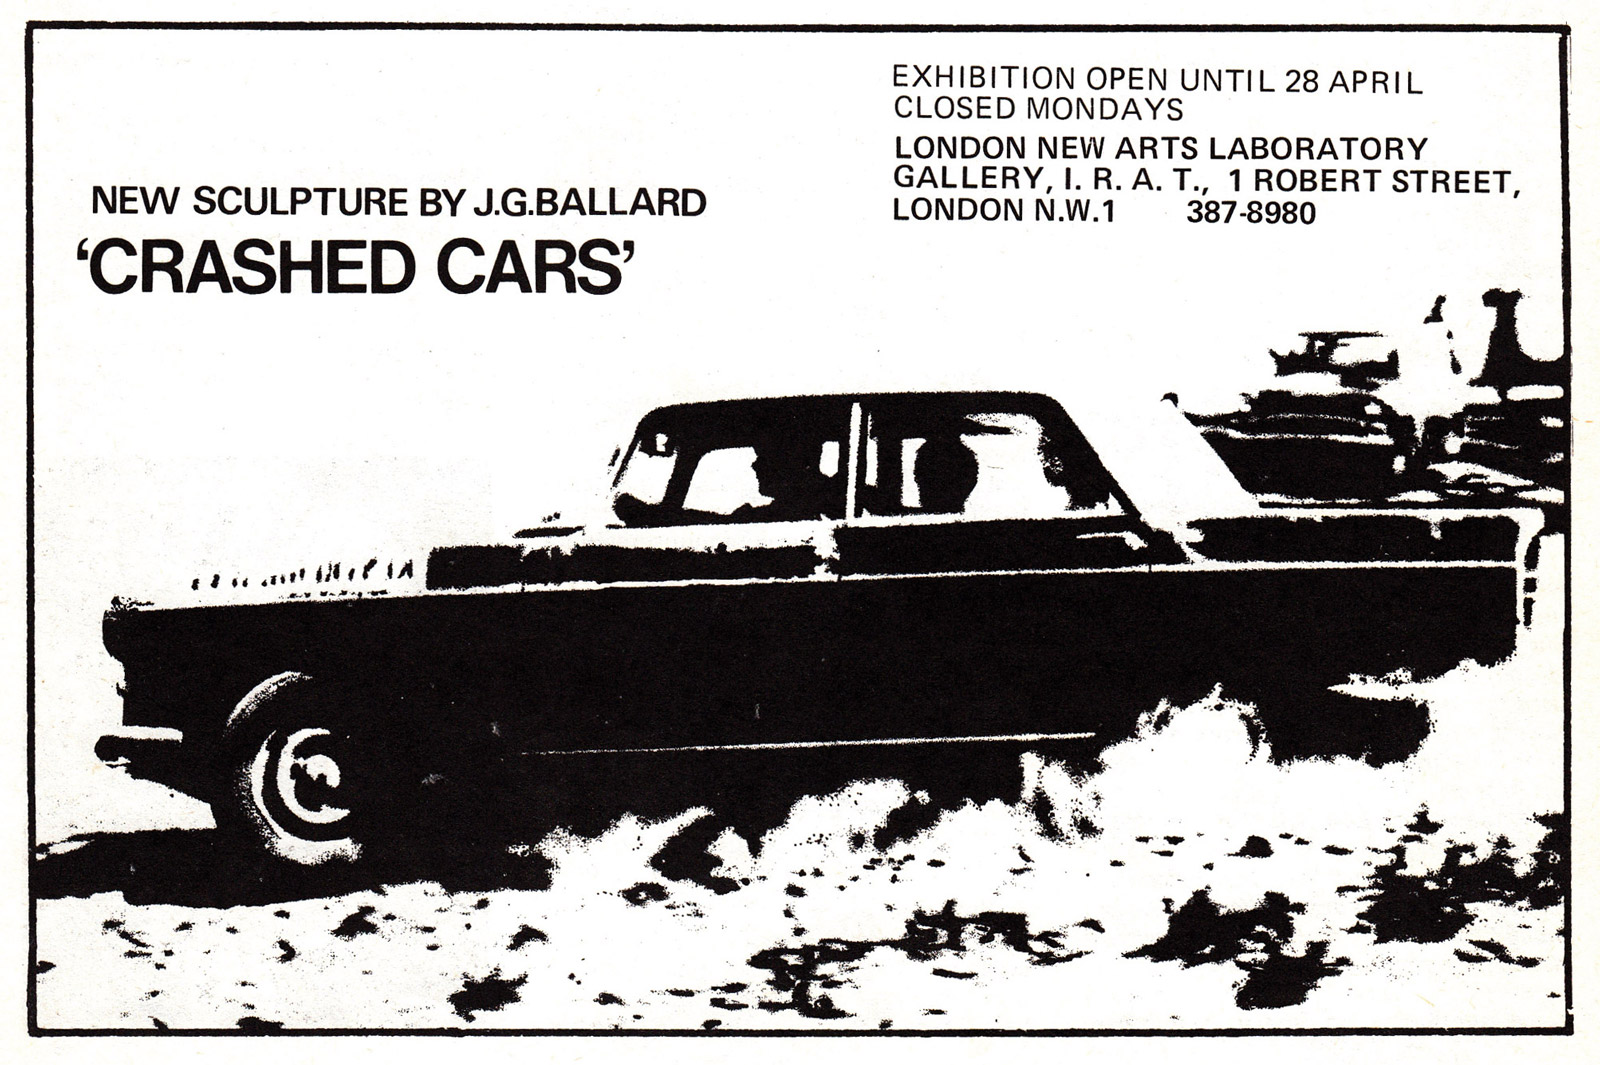 Print ad for “Crashed Cars,” an exhibition of Ballard’s sculpture held in April 1970.